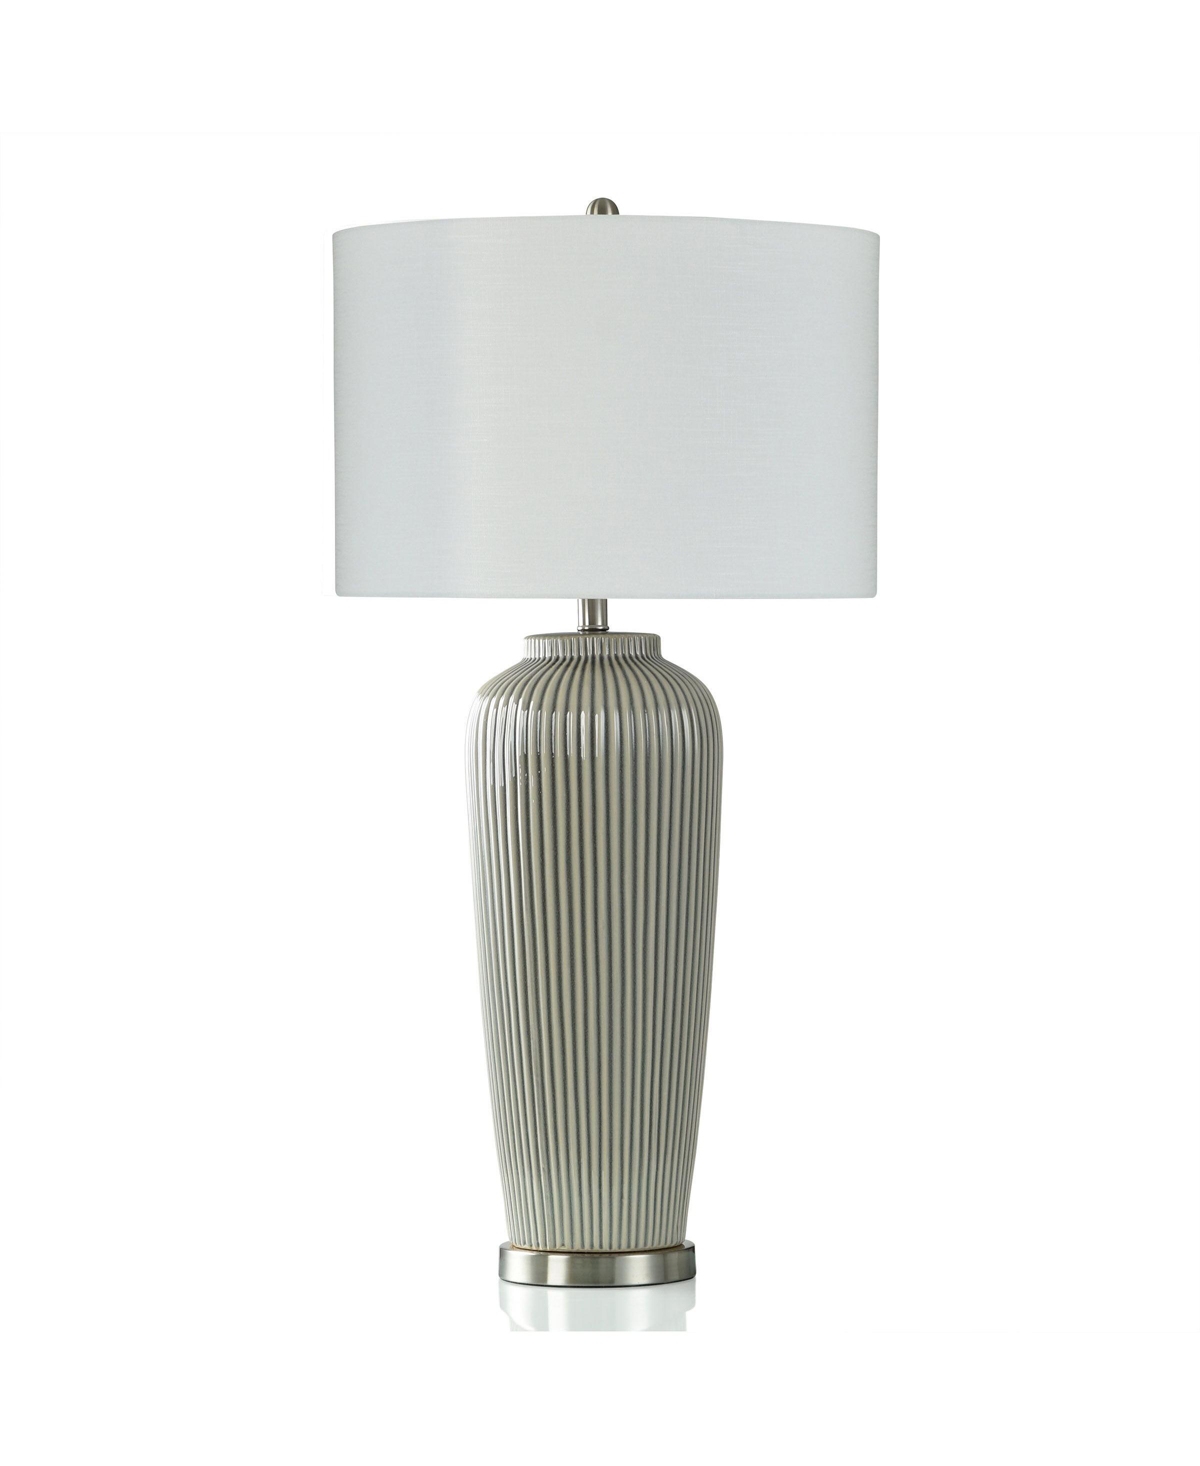 Stylecraft Home Collection 36" Pristine Antique-like Crackle Ribbed Ceramic Table Lamp In Cream And Grey,crackle Ribbed Ceramic